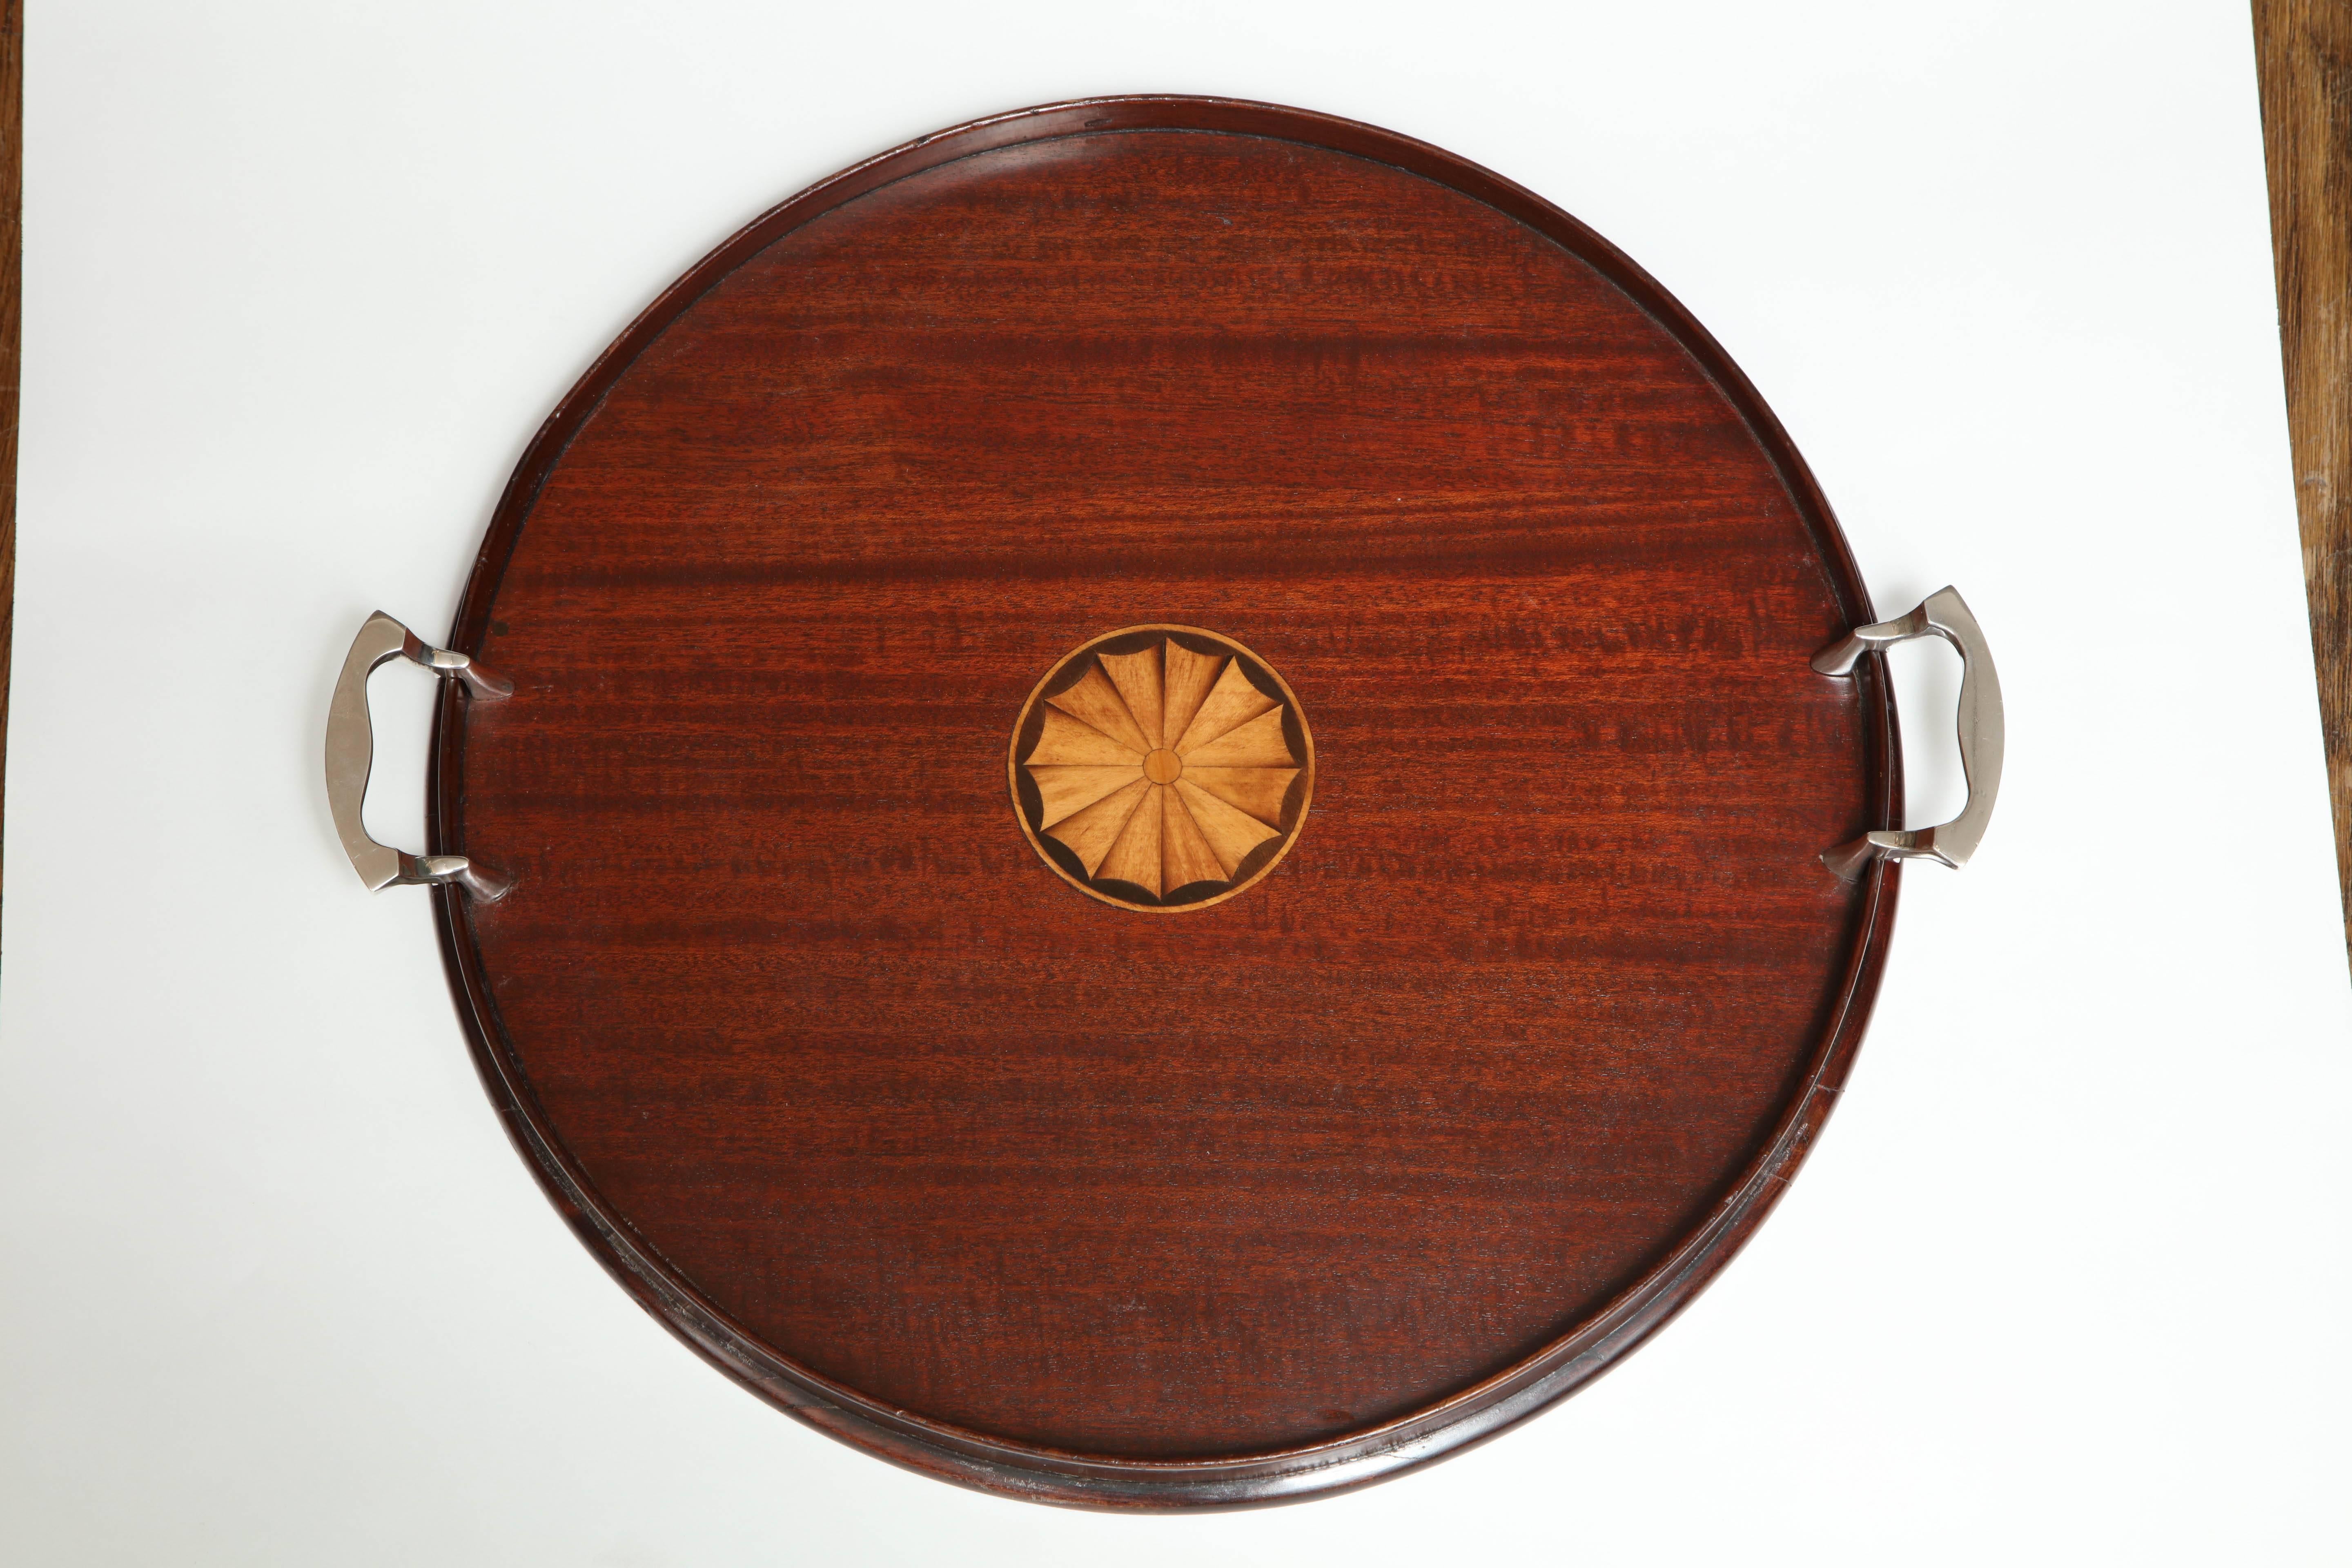 Edwardian Sheraton-Style Round Wood Serving Tray with Silver Plated Handles 1